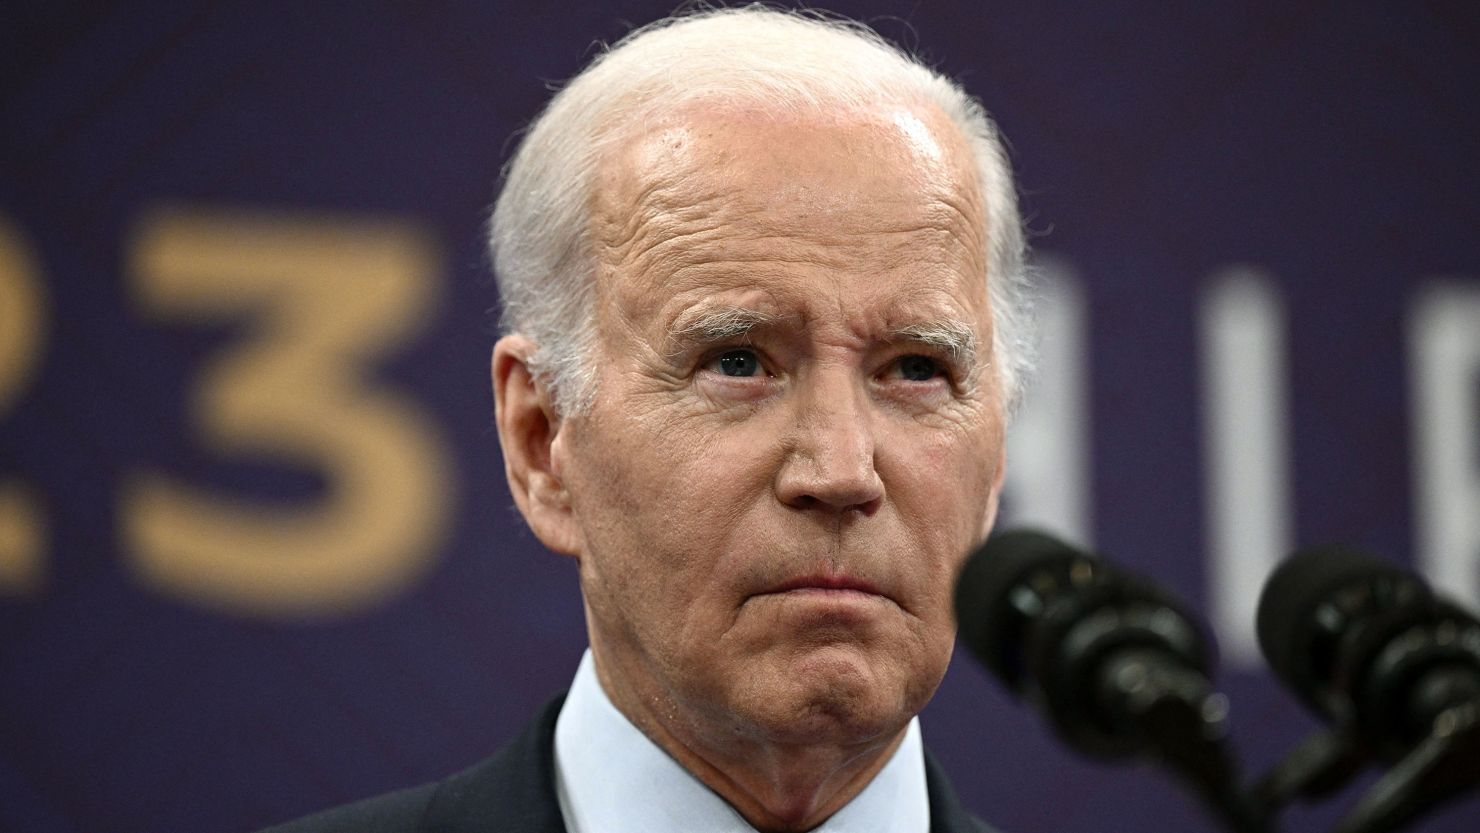 US President Joe Biden speaks during a press conference following the G7 Leaders' Summit in Hiroshima, Japan, on May 21